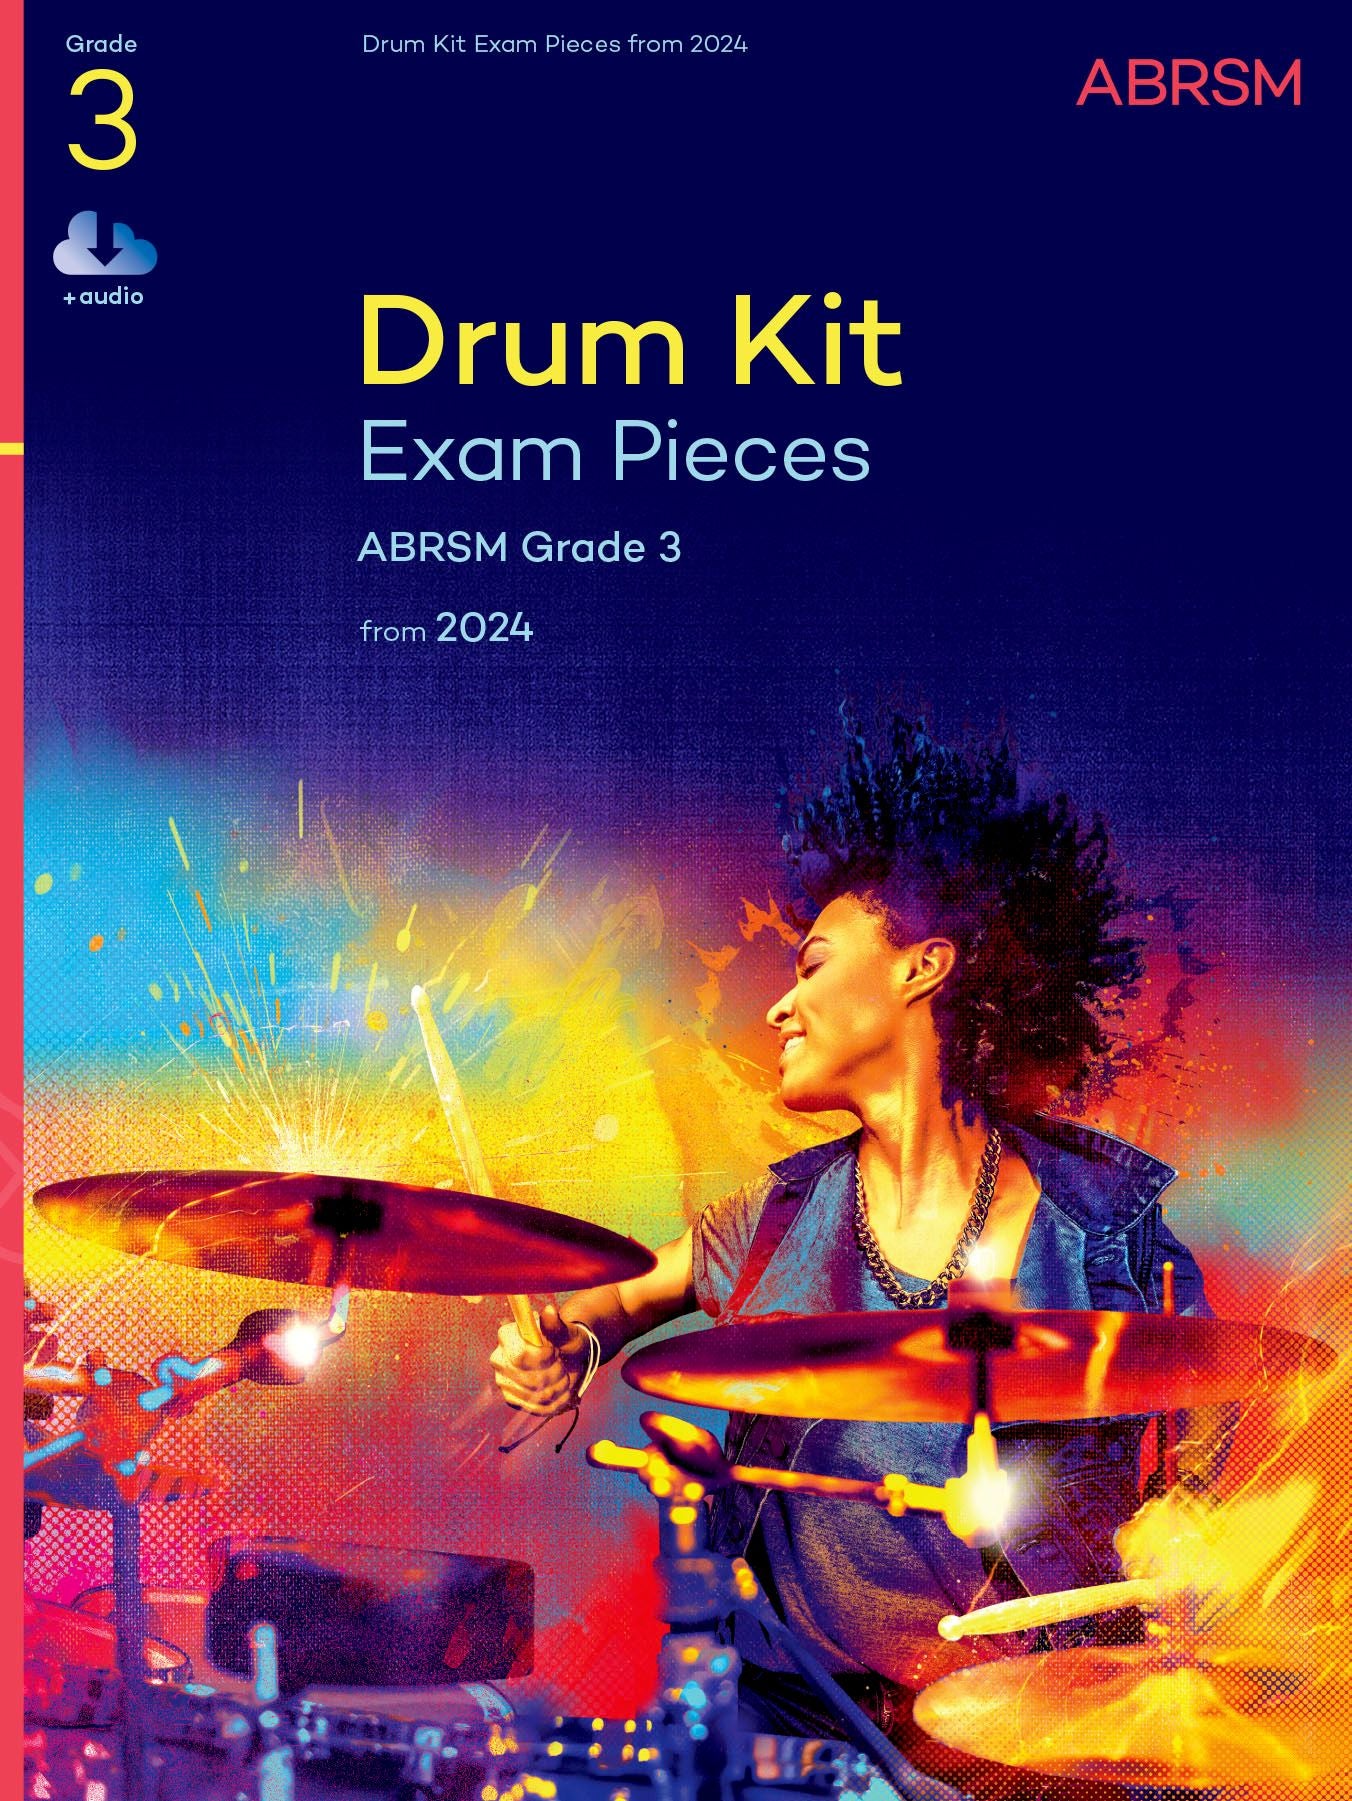 ABRSM Drum Kit Exam Pieces Grade 3 from 2024 (w/ Audio)